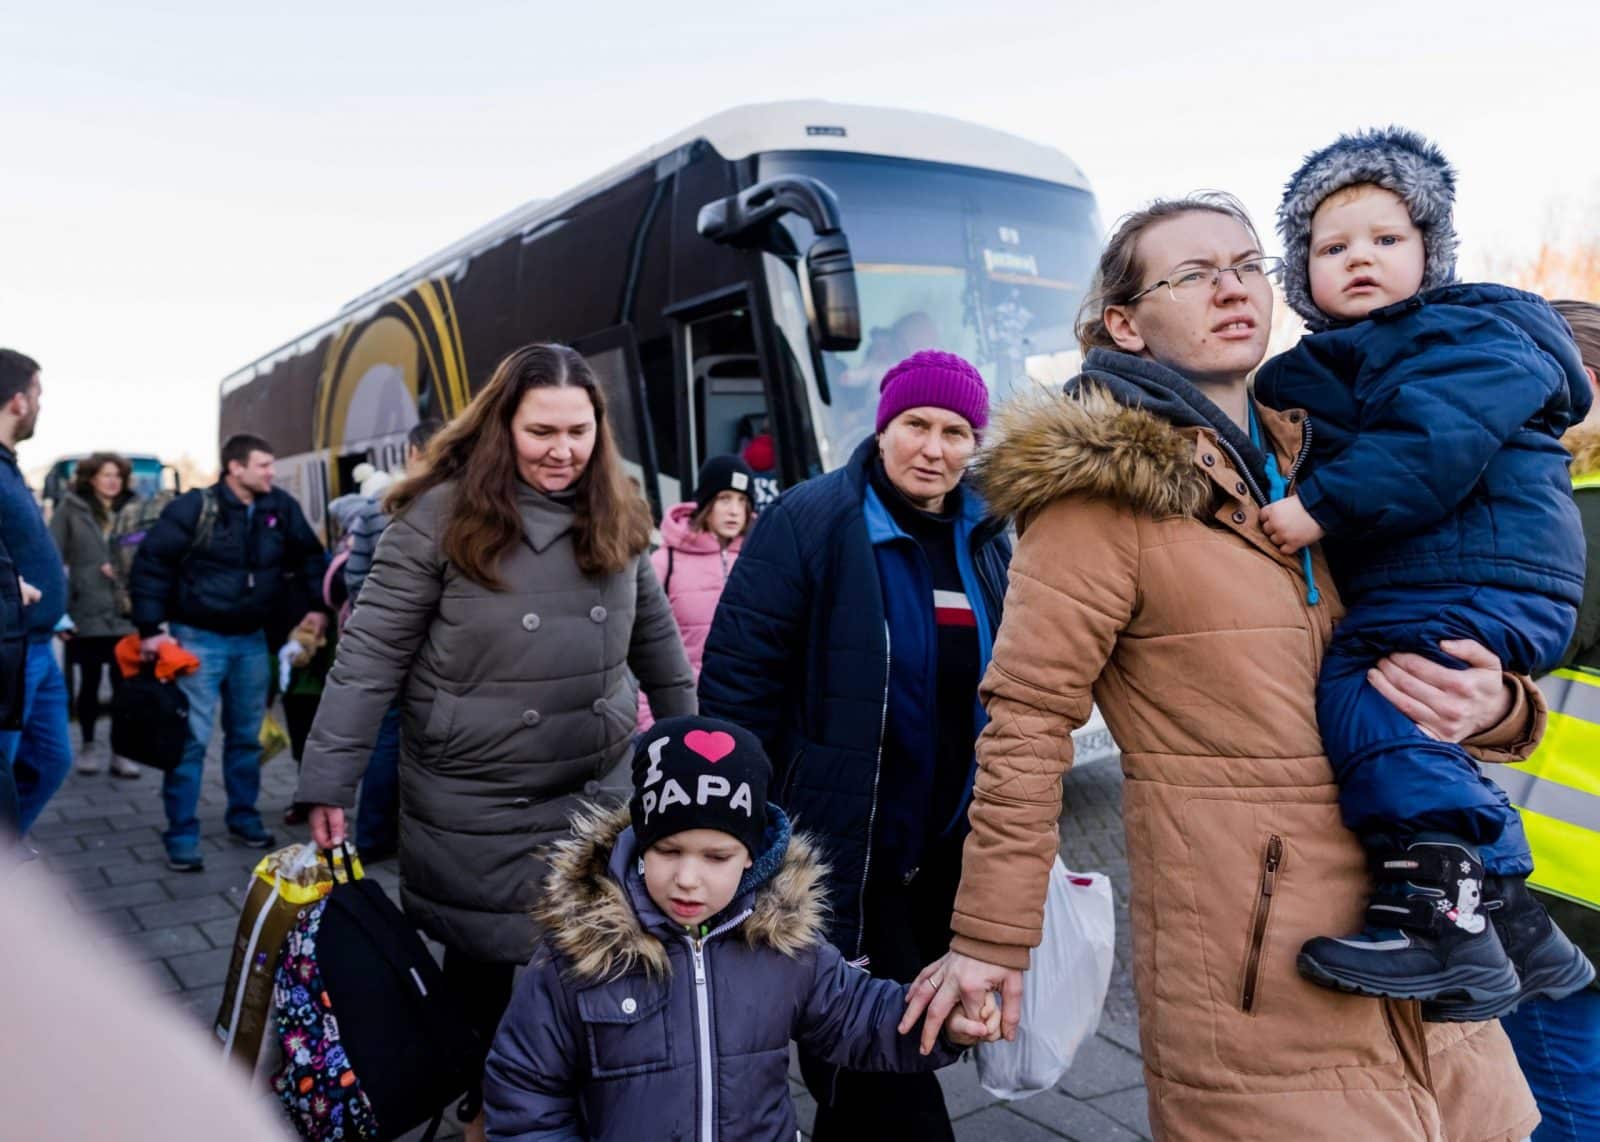 More than 4,000 Americans are ready to become sponsors for Ukrainian refugees in the United States